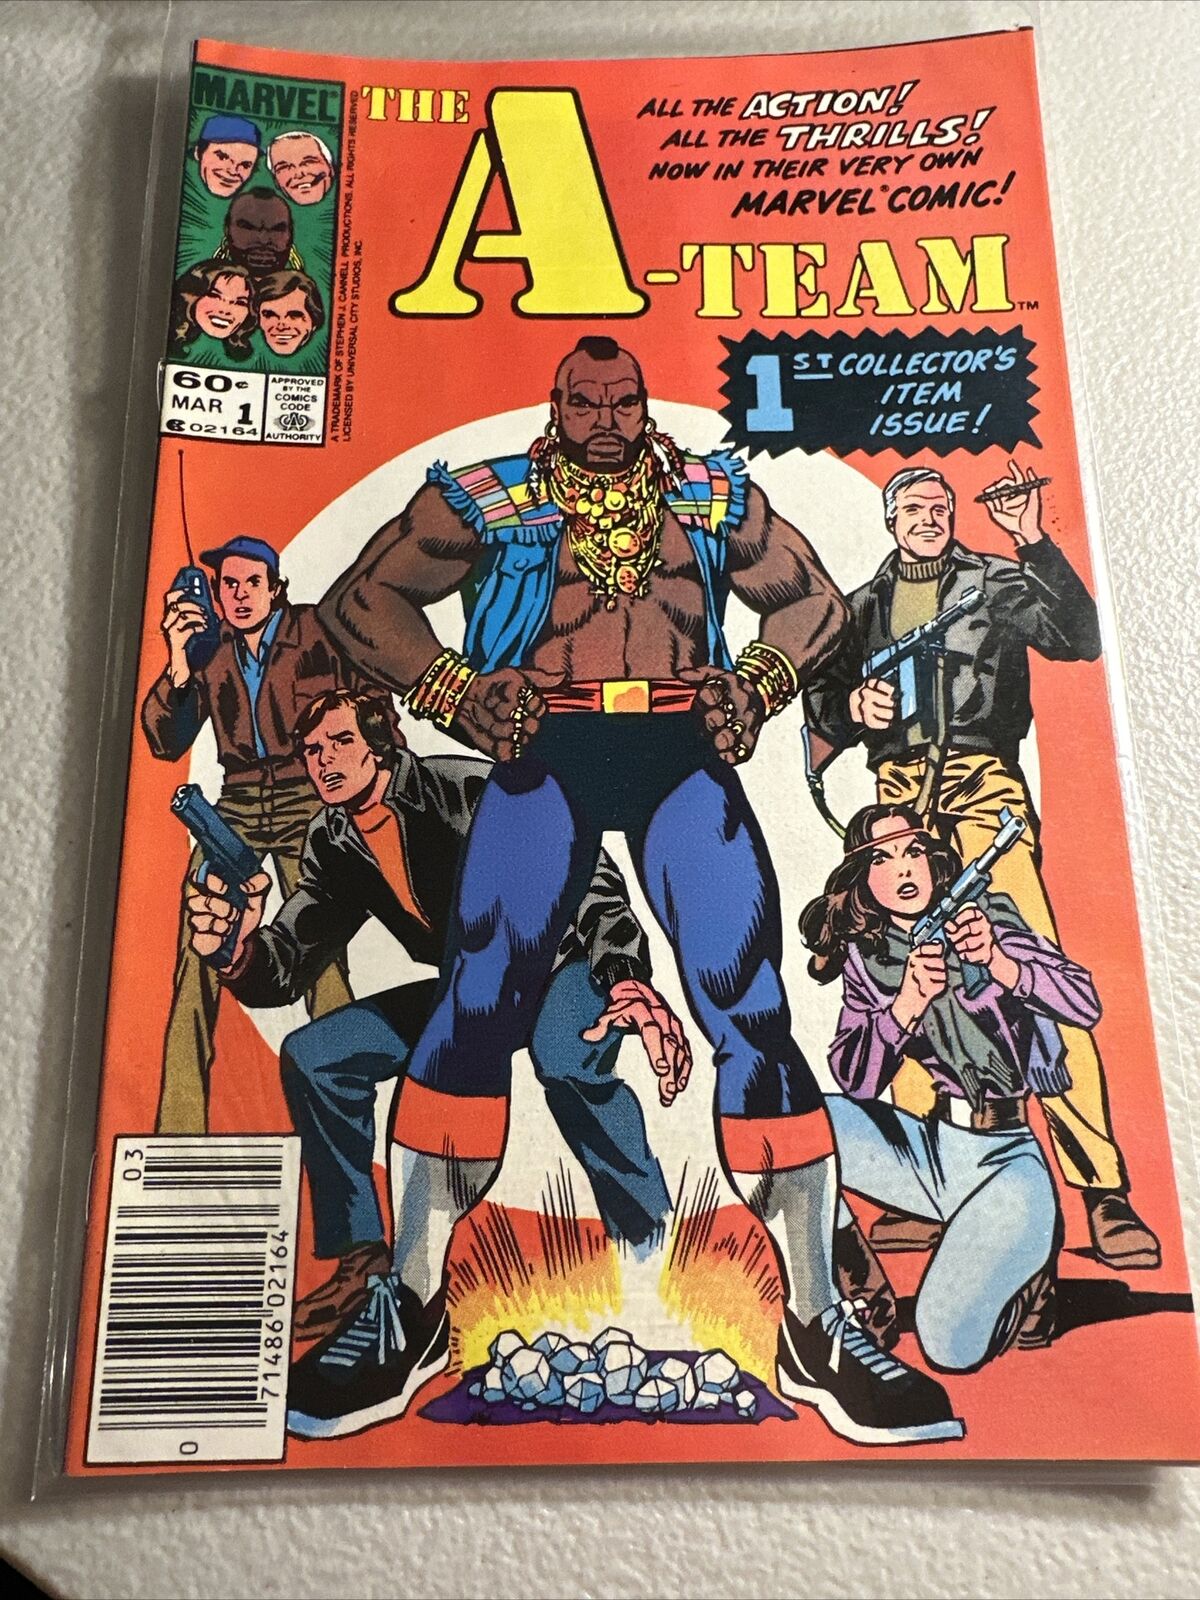 The A-Team #1 Marvel March 1984 Comic Book Mr T!